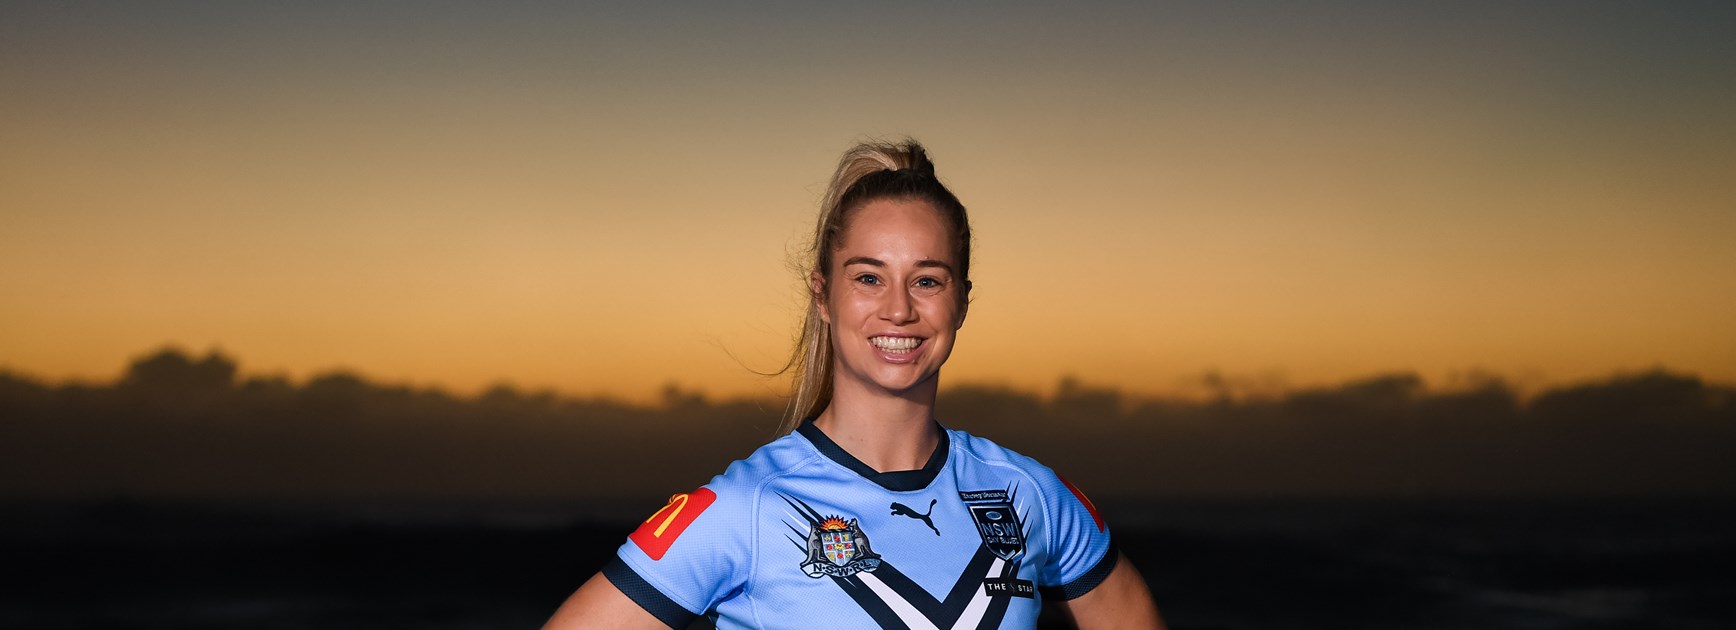 Your chance to rub shoulders with NSW Women's Origin team